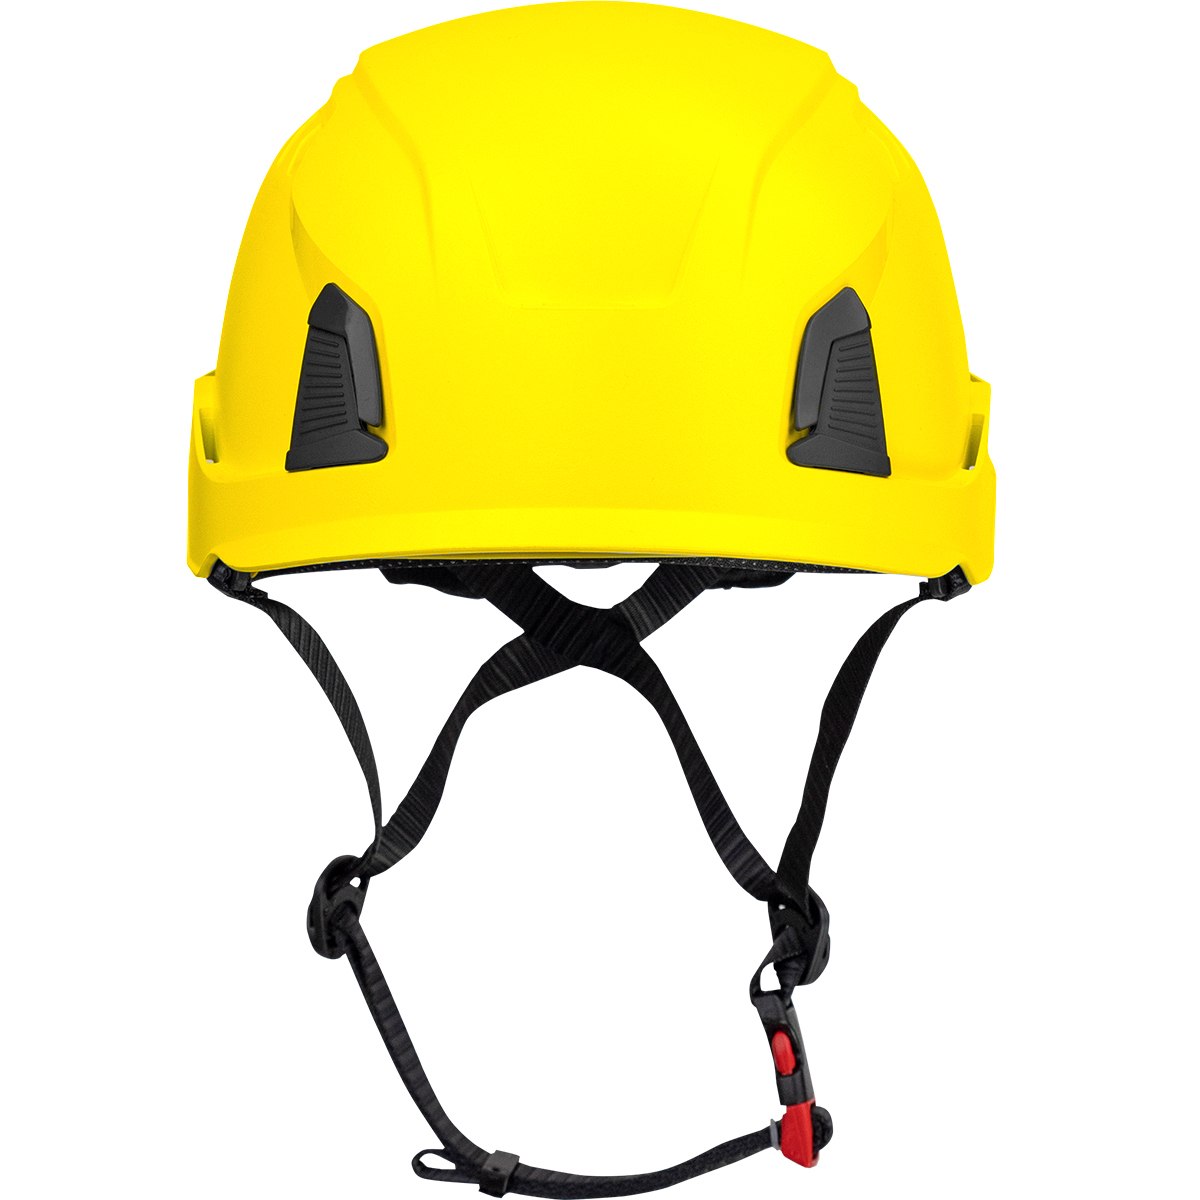 PIP® 280-HP1491RM-01 Traverse™ Industrial Climbing Helmet with Mips® Technology, Polycarbonate/ABS Shell, EPS Foam Impact Liner, HDPE Suspension, Wheel Ratchet Adjustment and 4-Point Chin StrapTYPE II, Yellow